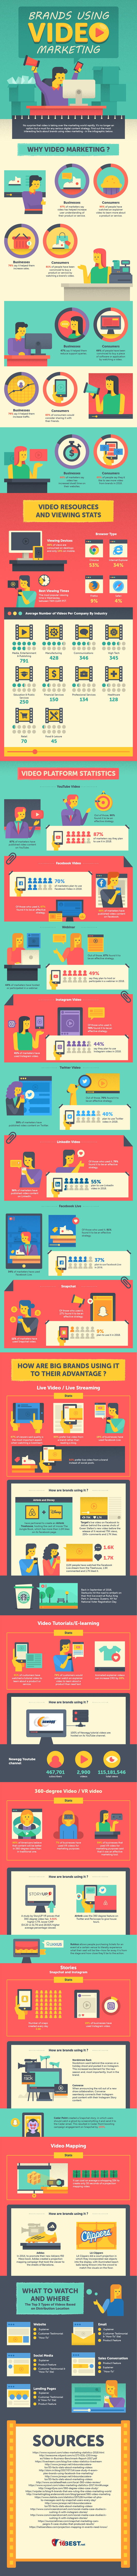 brands-using-video-marketing-infographic